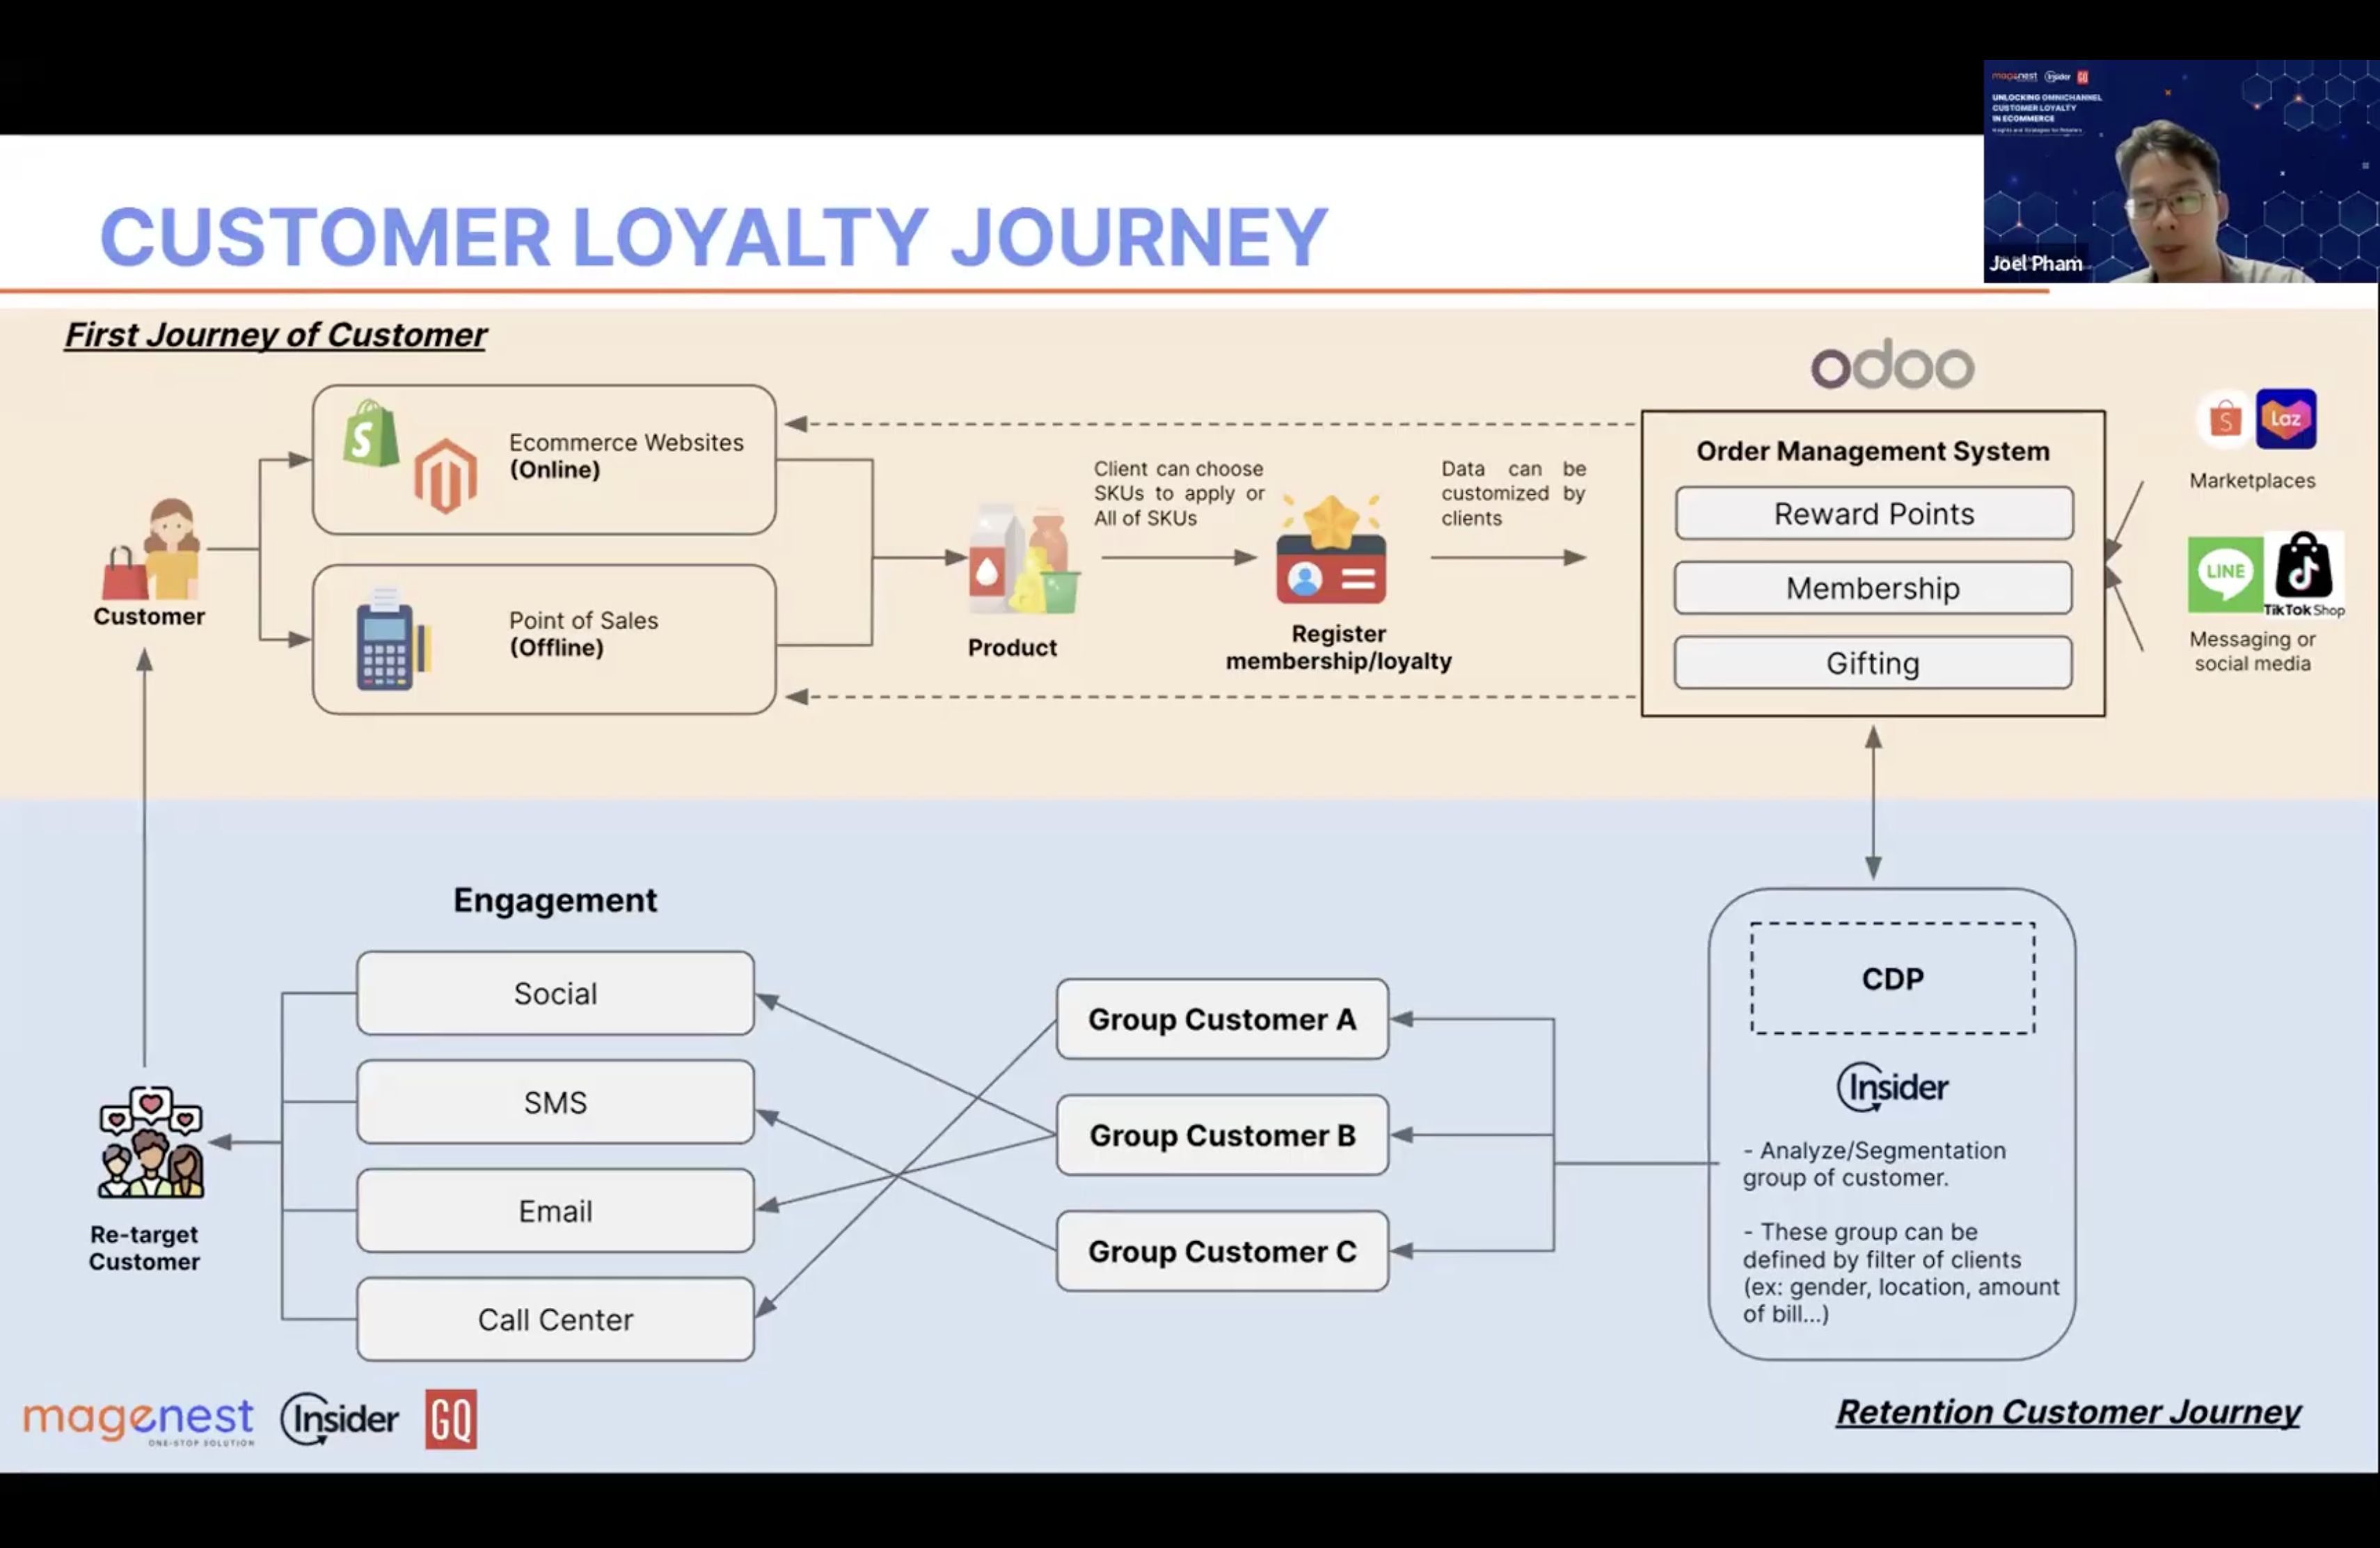 The importance of proper loyalty activities - Customer loyalty journey